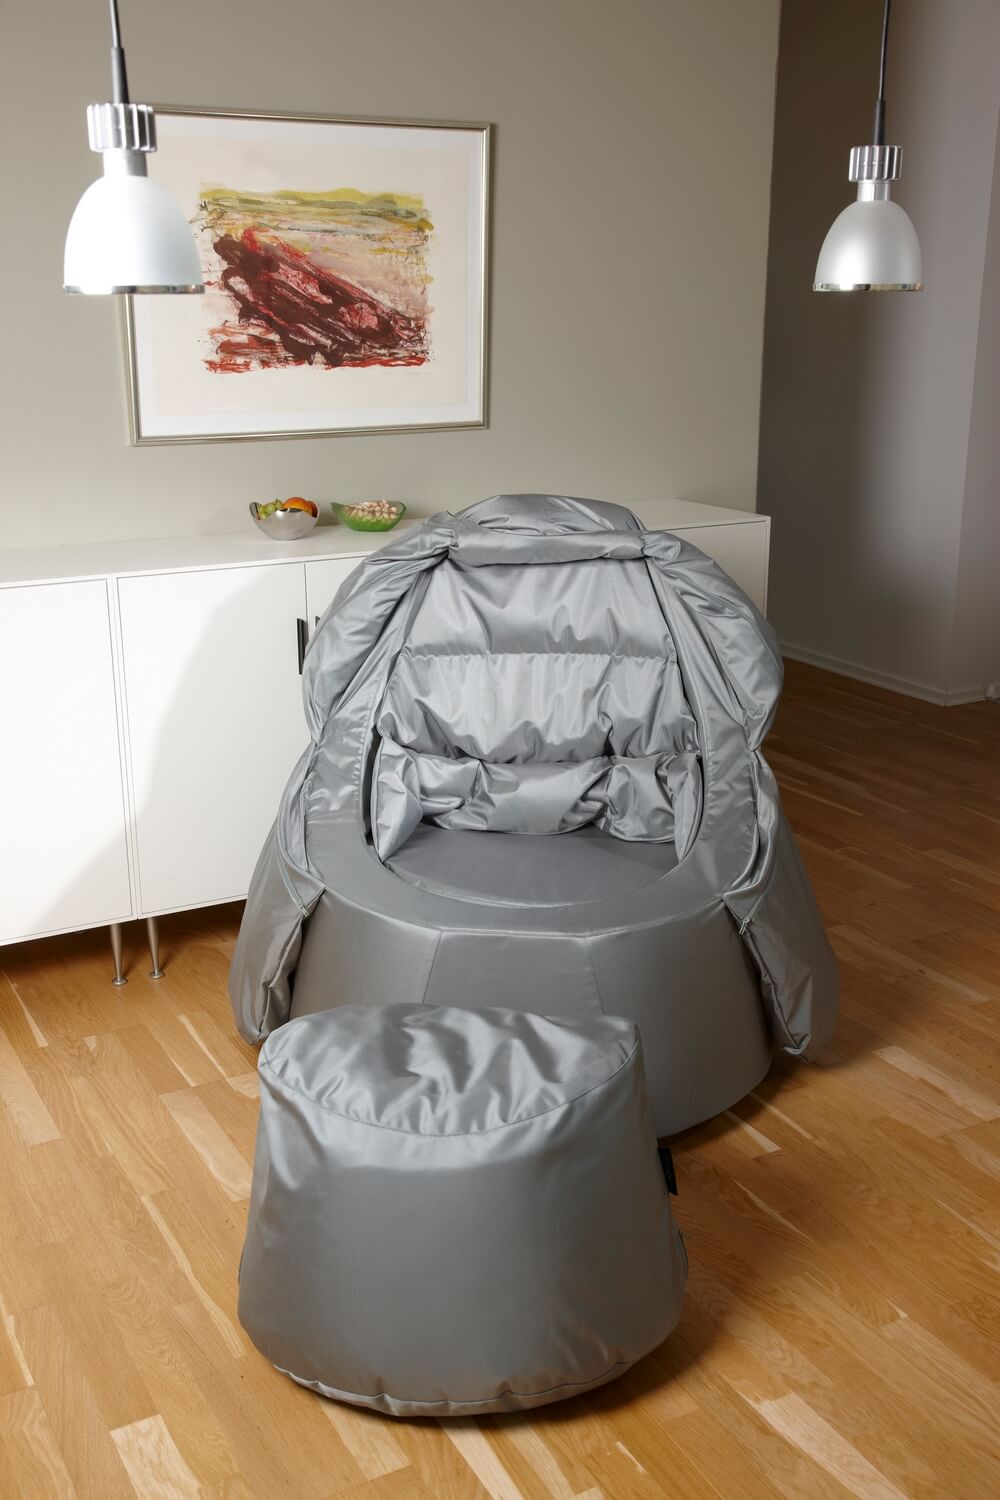 Protac Sensit Straight Chair Massage & Vibration Size Over 180cm, Seat Height 17